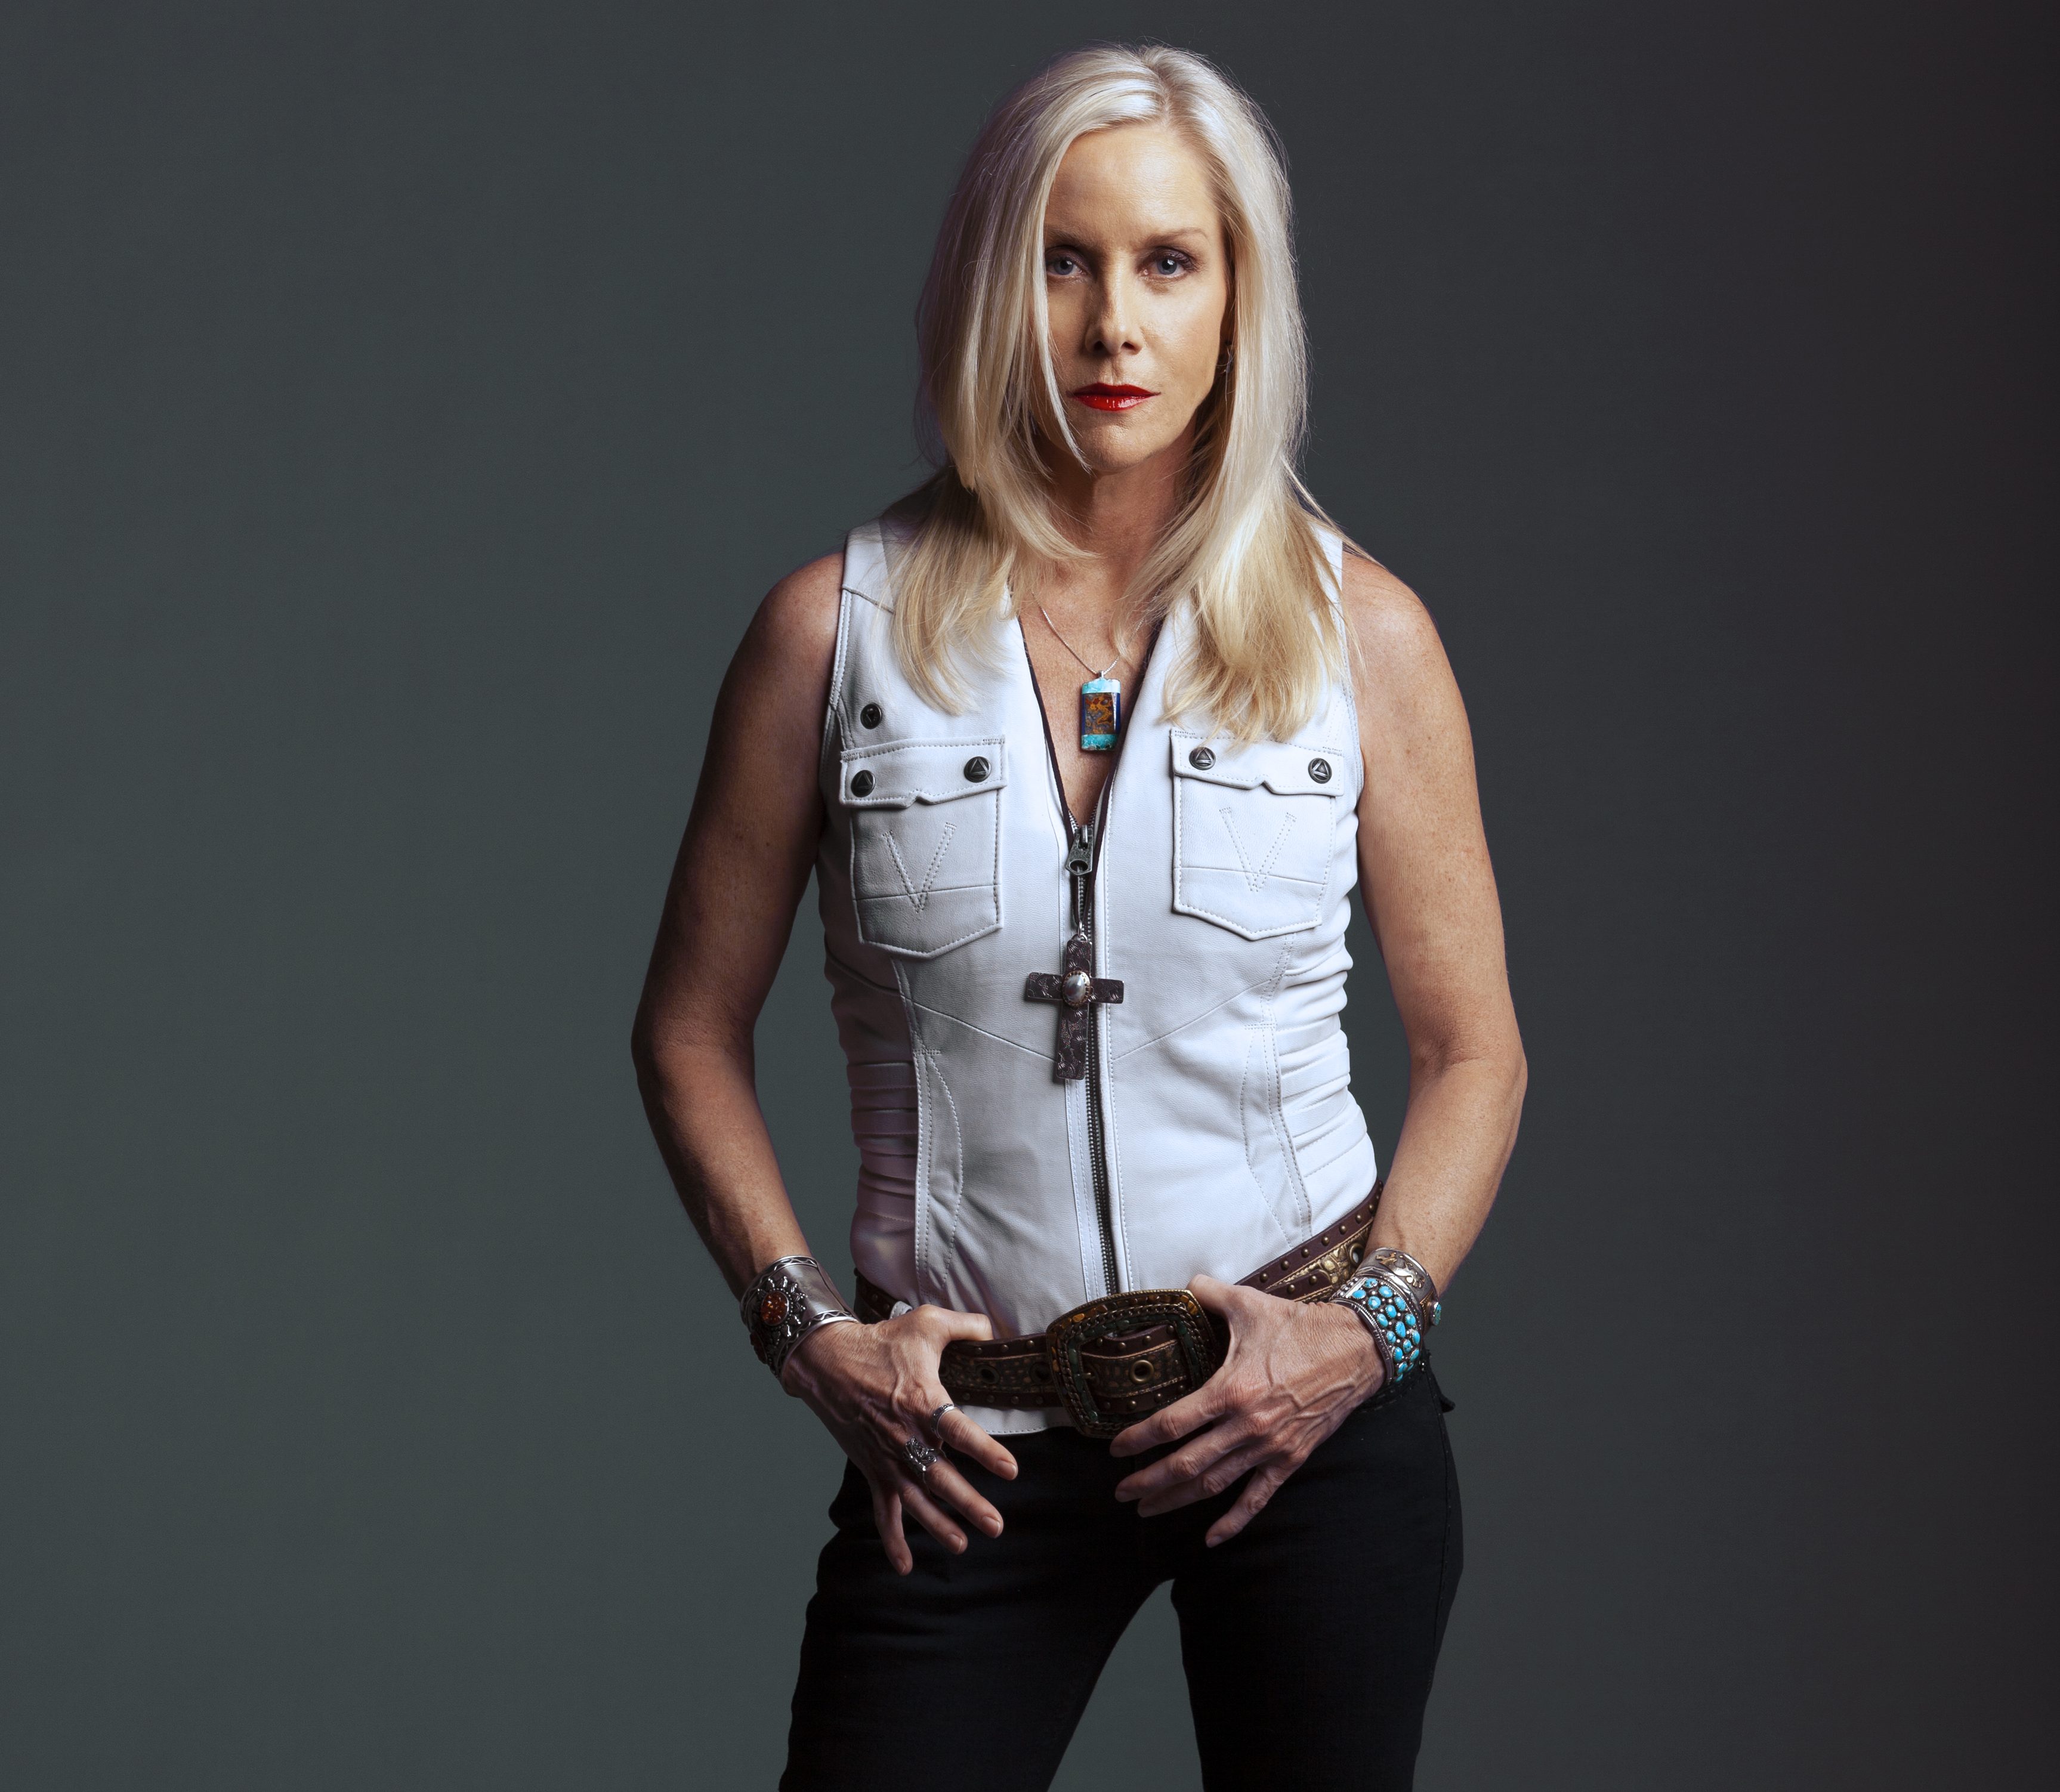 This Sunday Cherie Currie of The Runaways on The Pantheon.